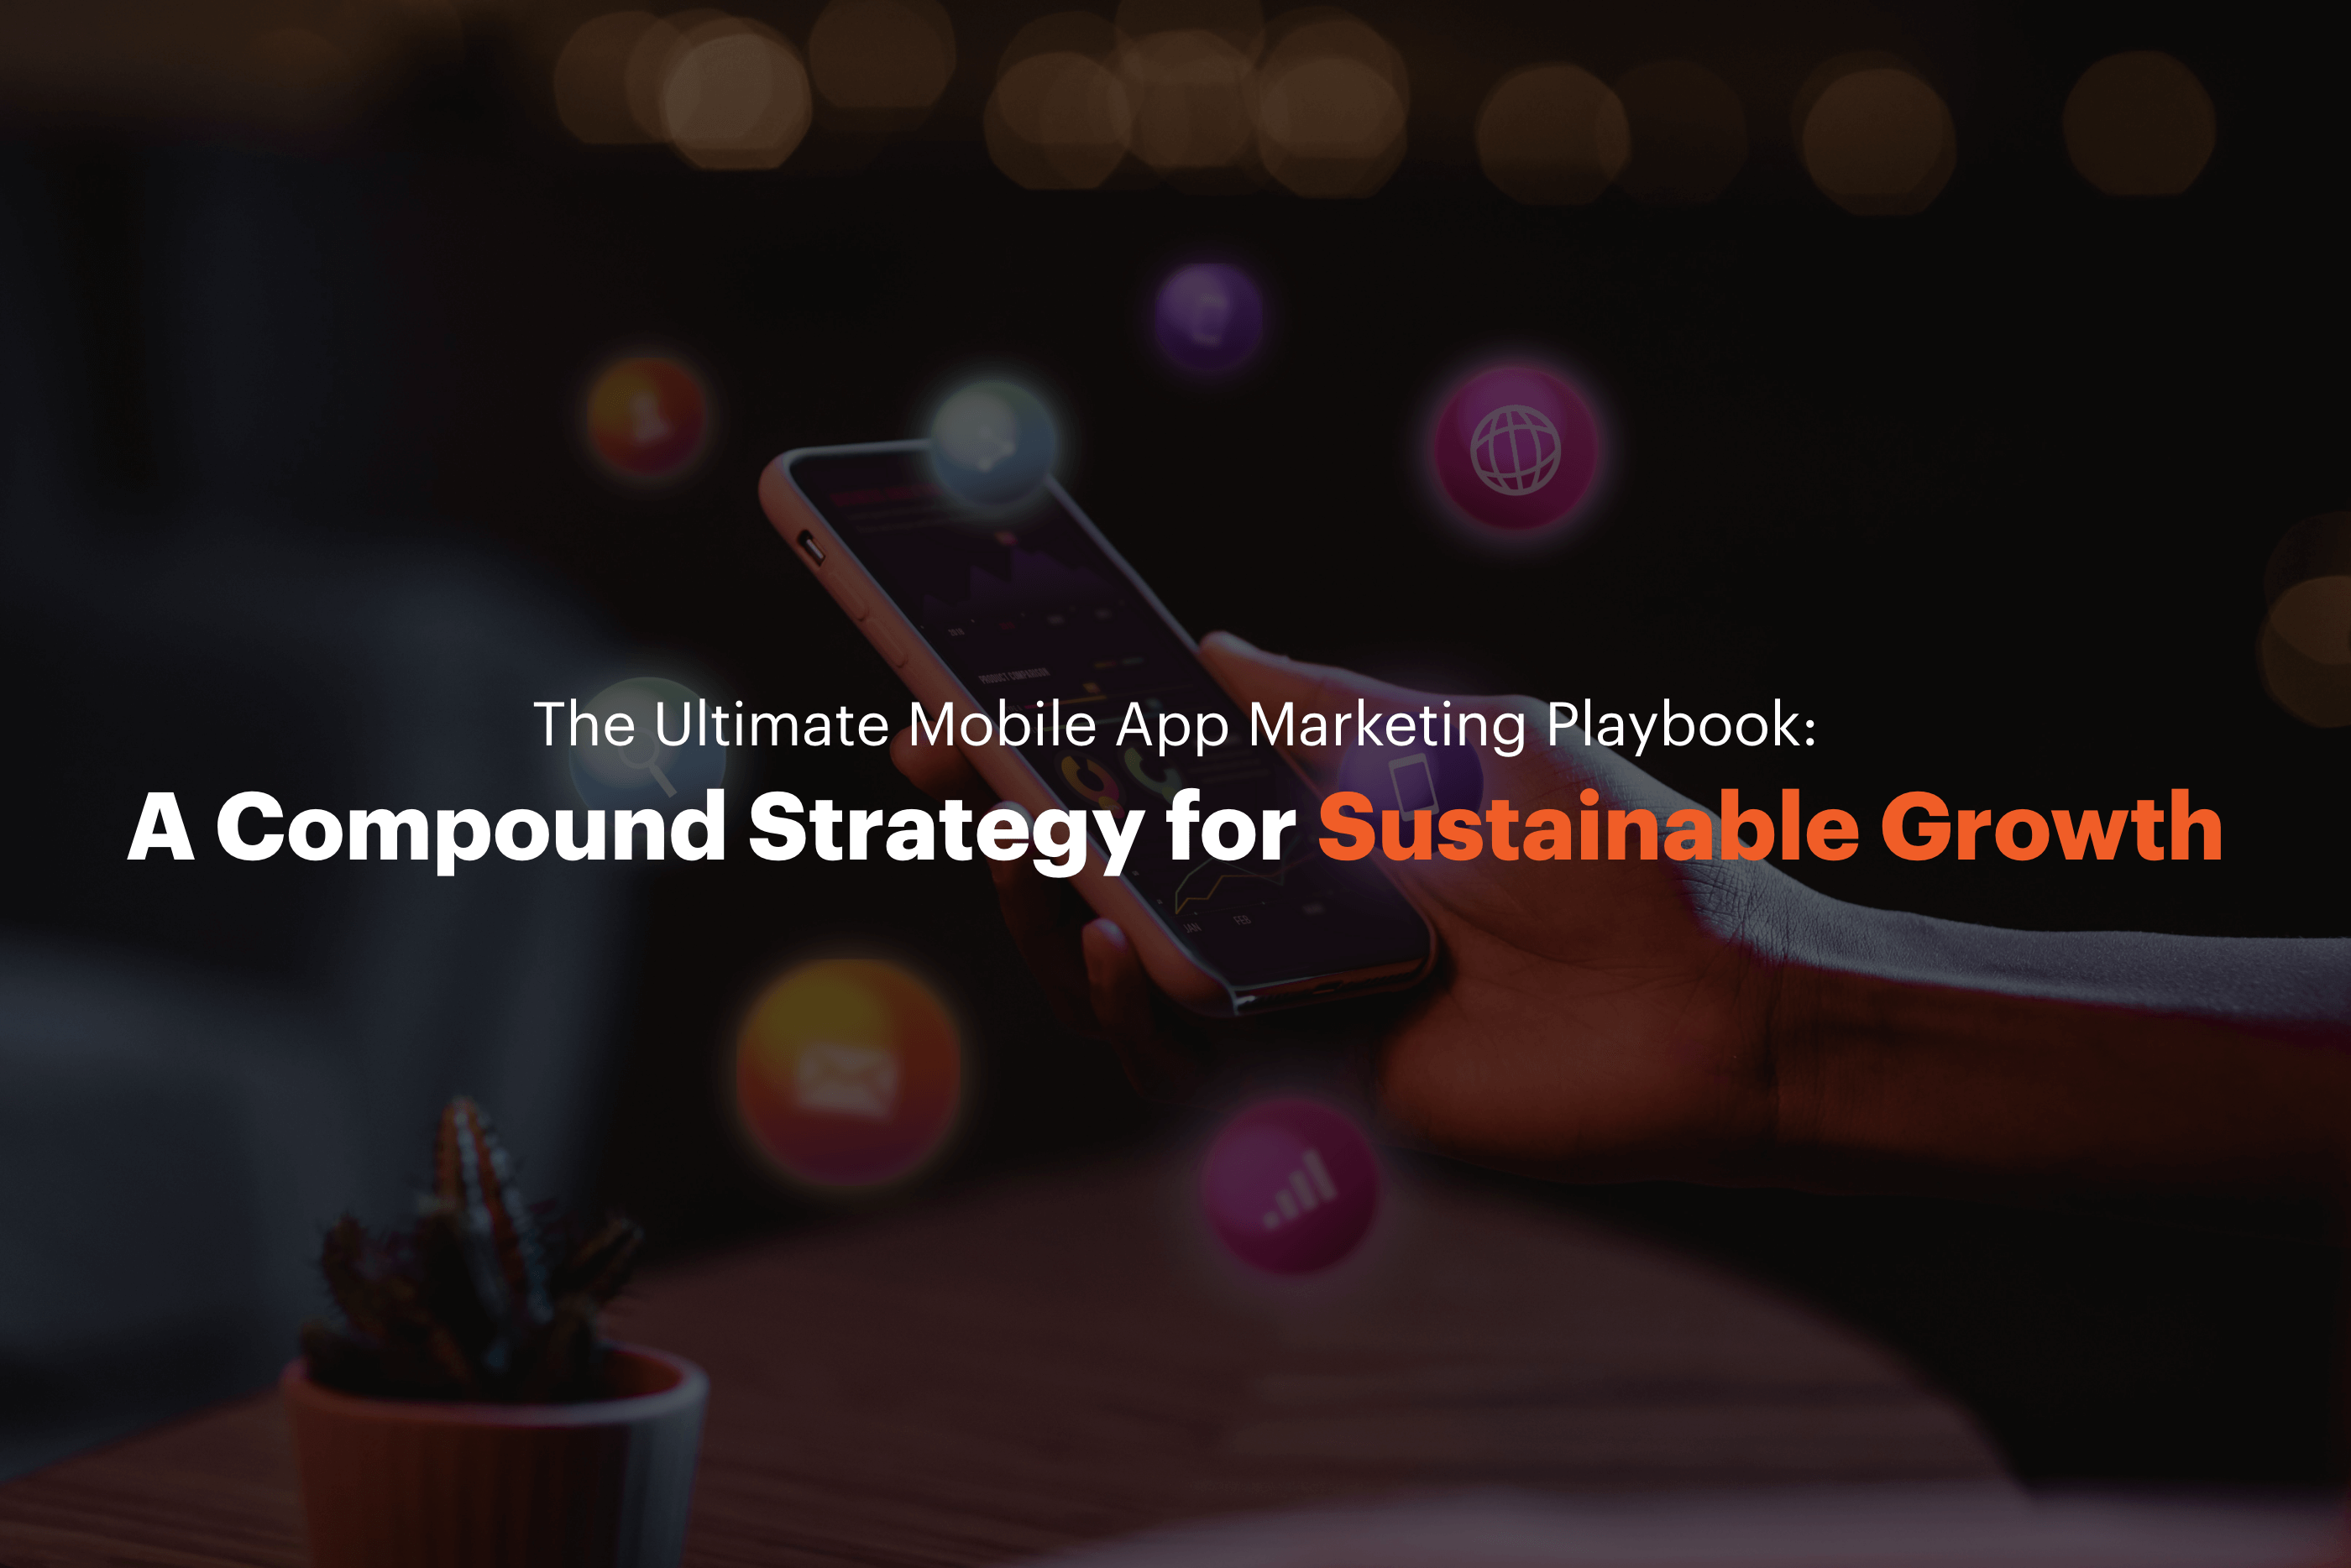 The Ultimate Mobile App Marketing Playbook: A Compound Strategy for Sustainable Growth